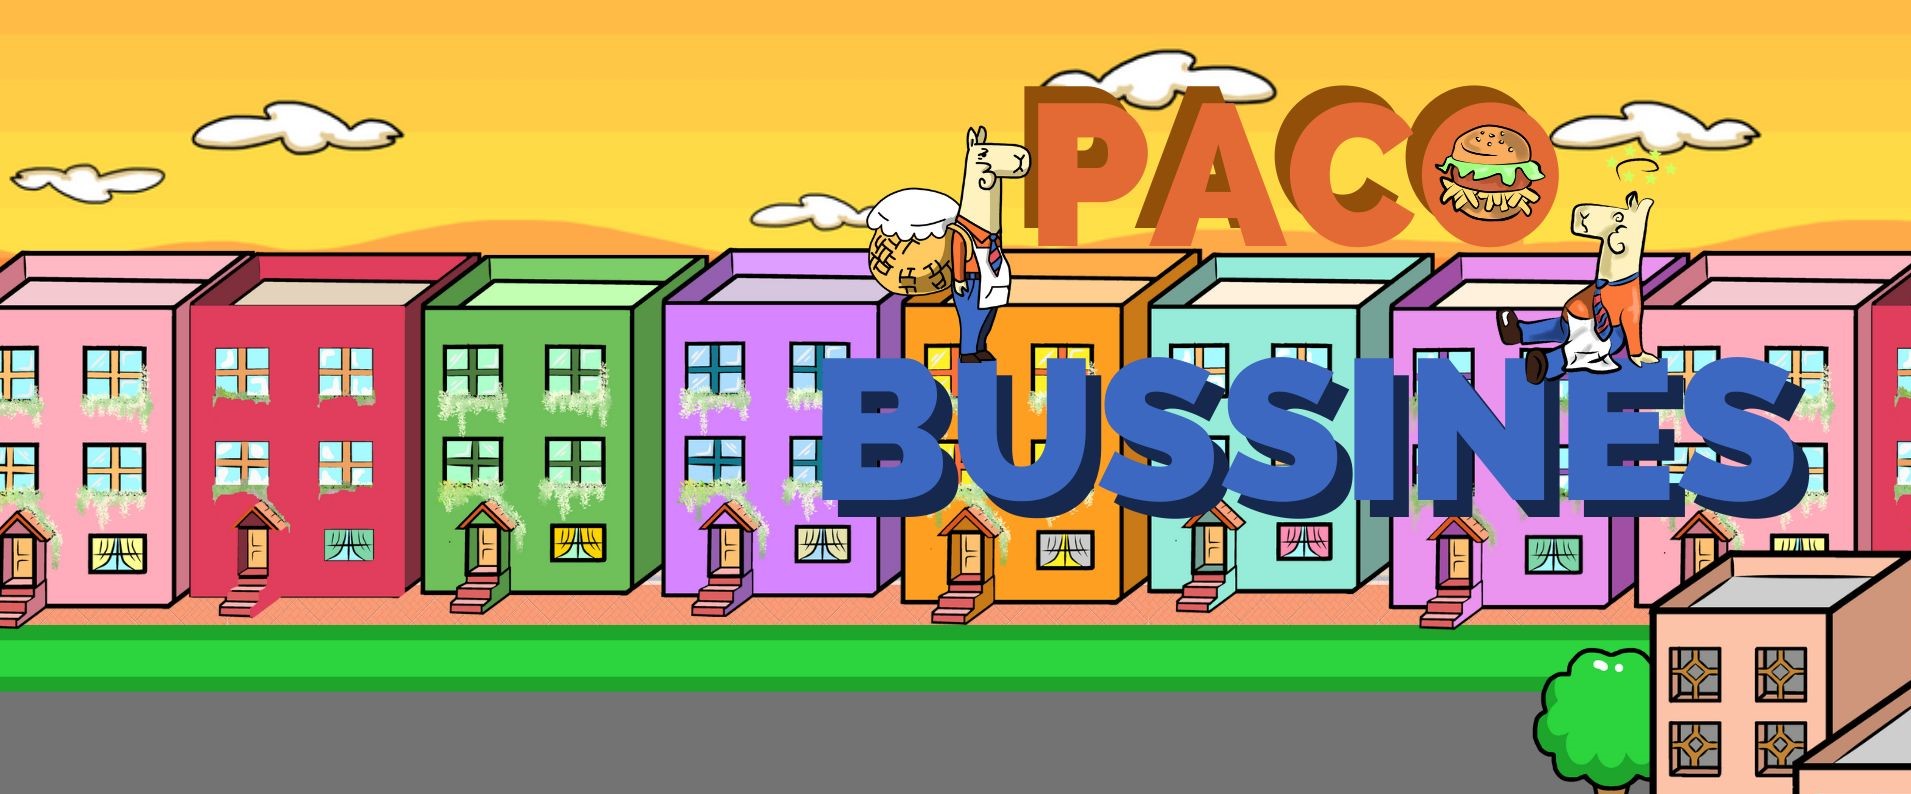 Paco Bussines